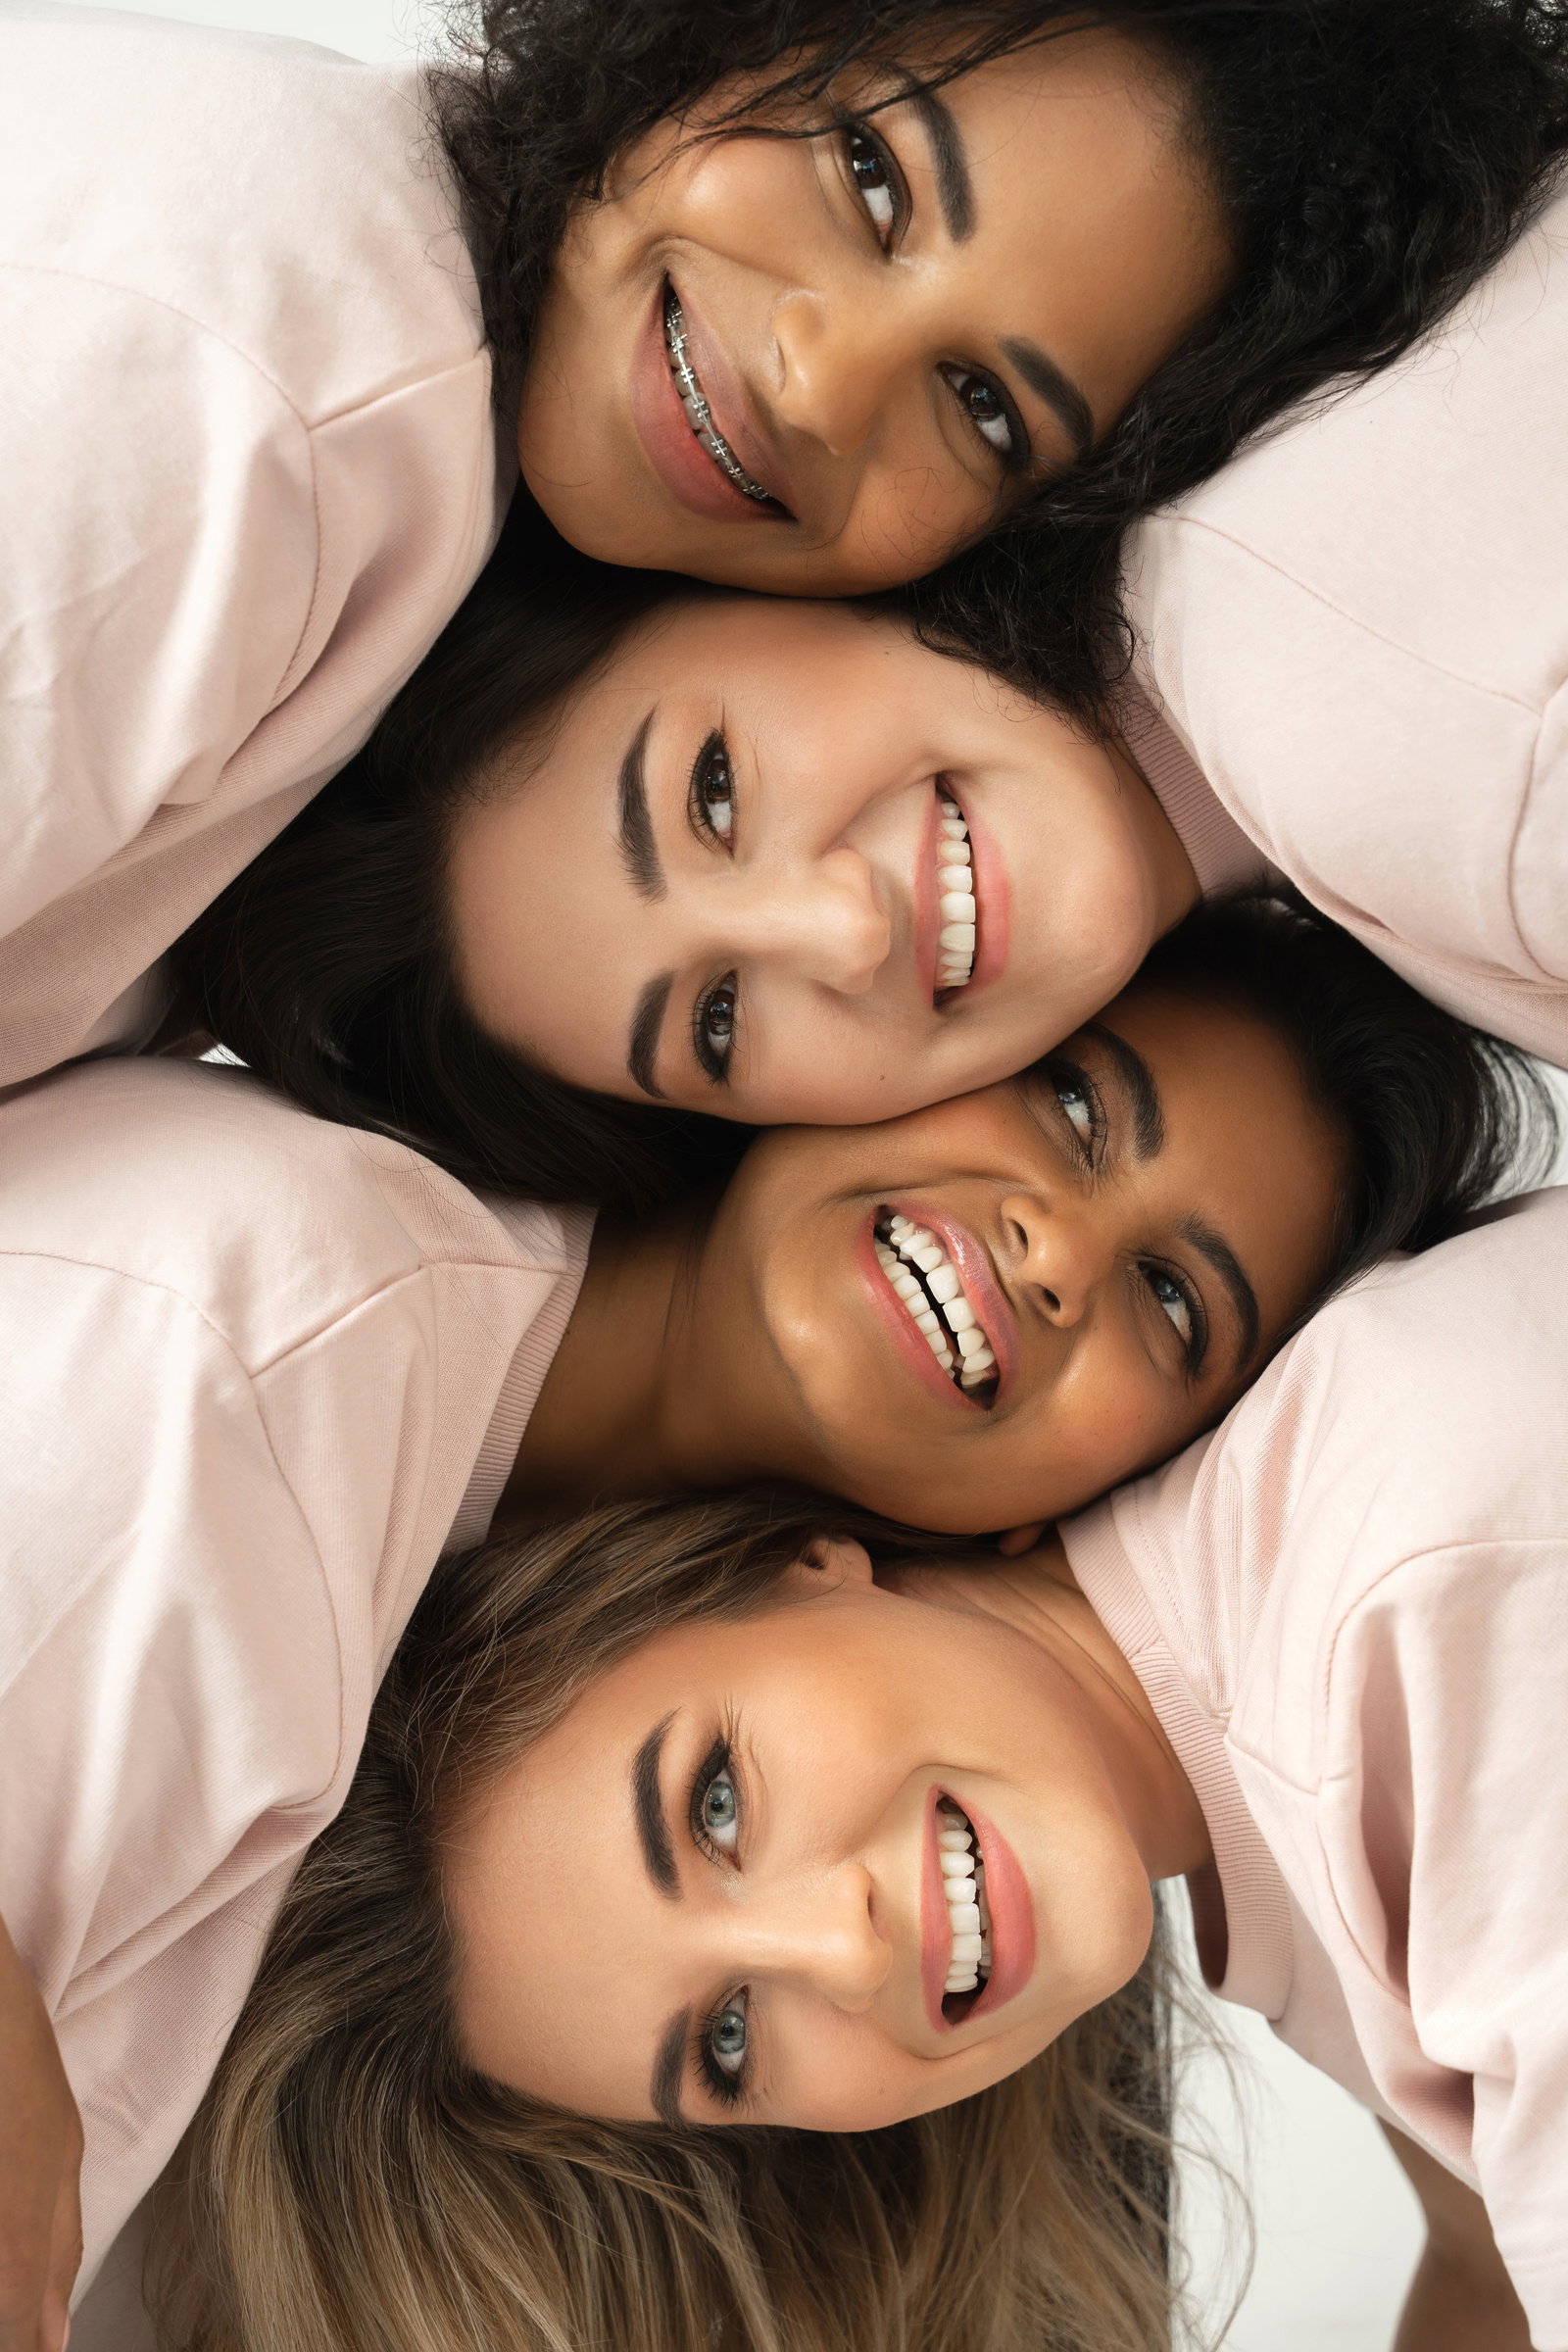 Group of Different Ethnicity Women. Multicultural Diversity and